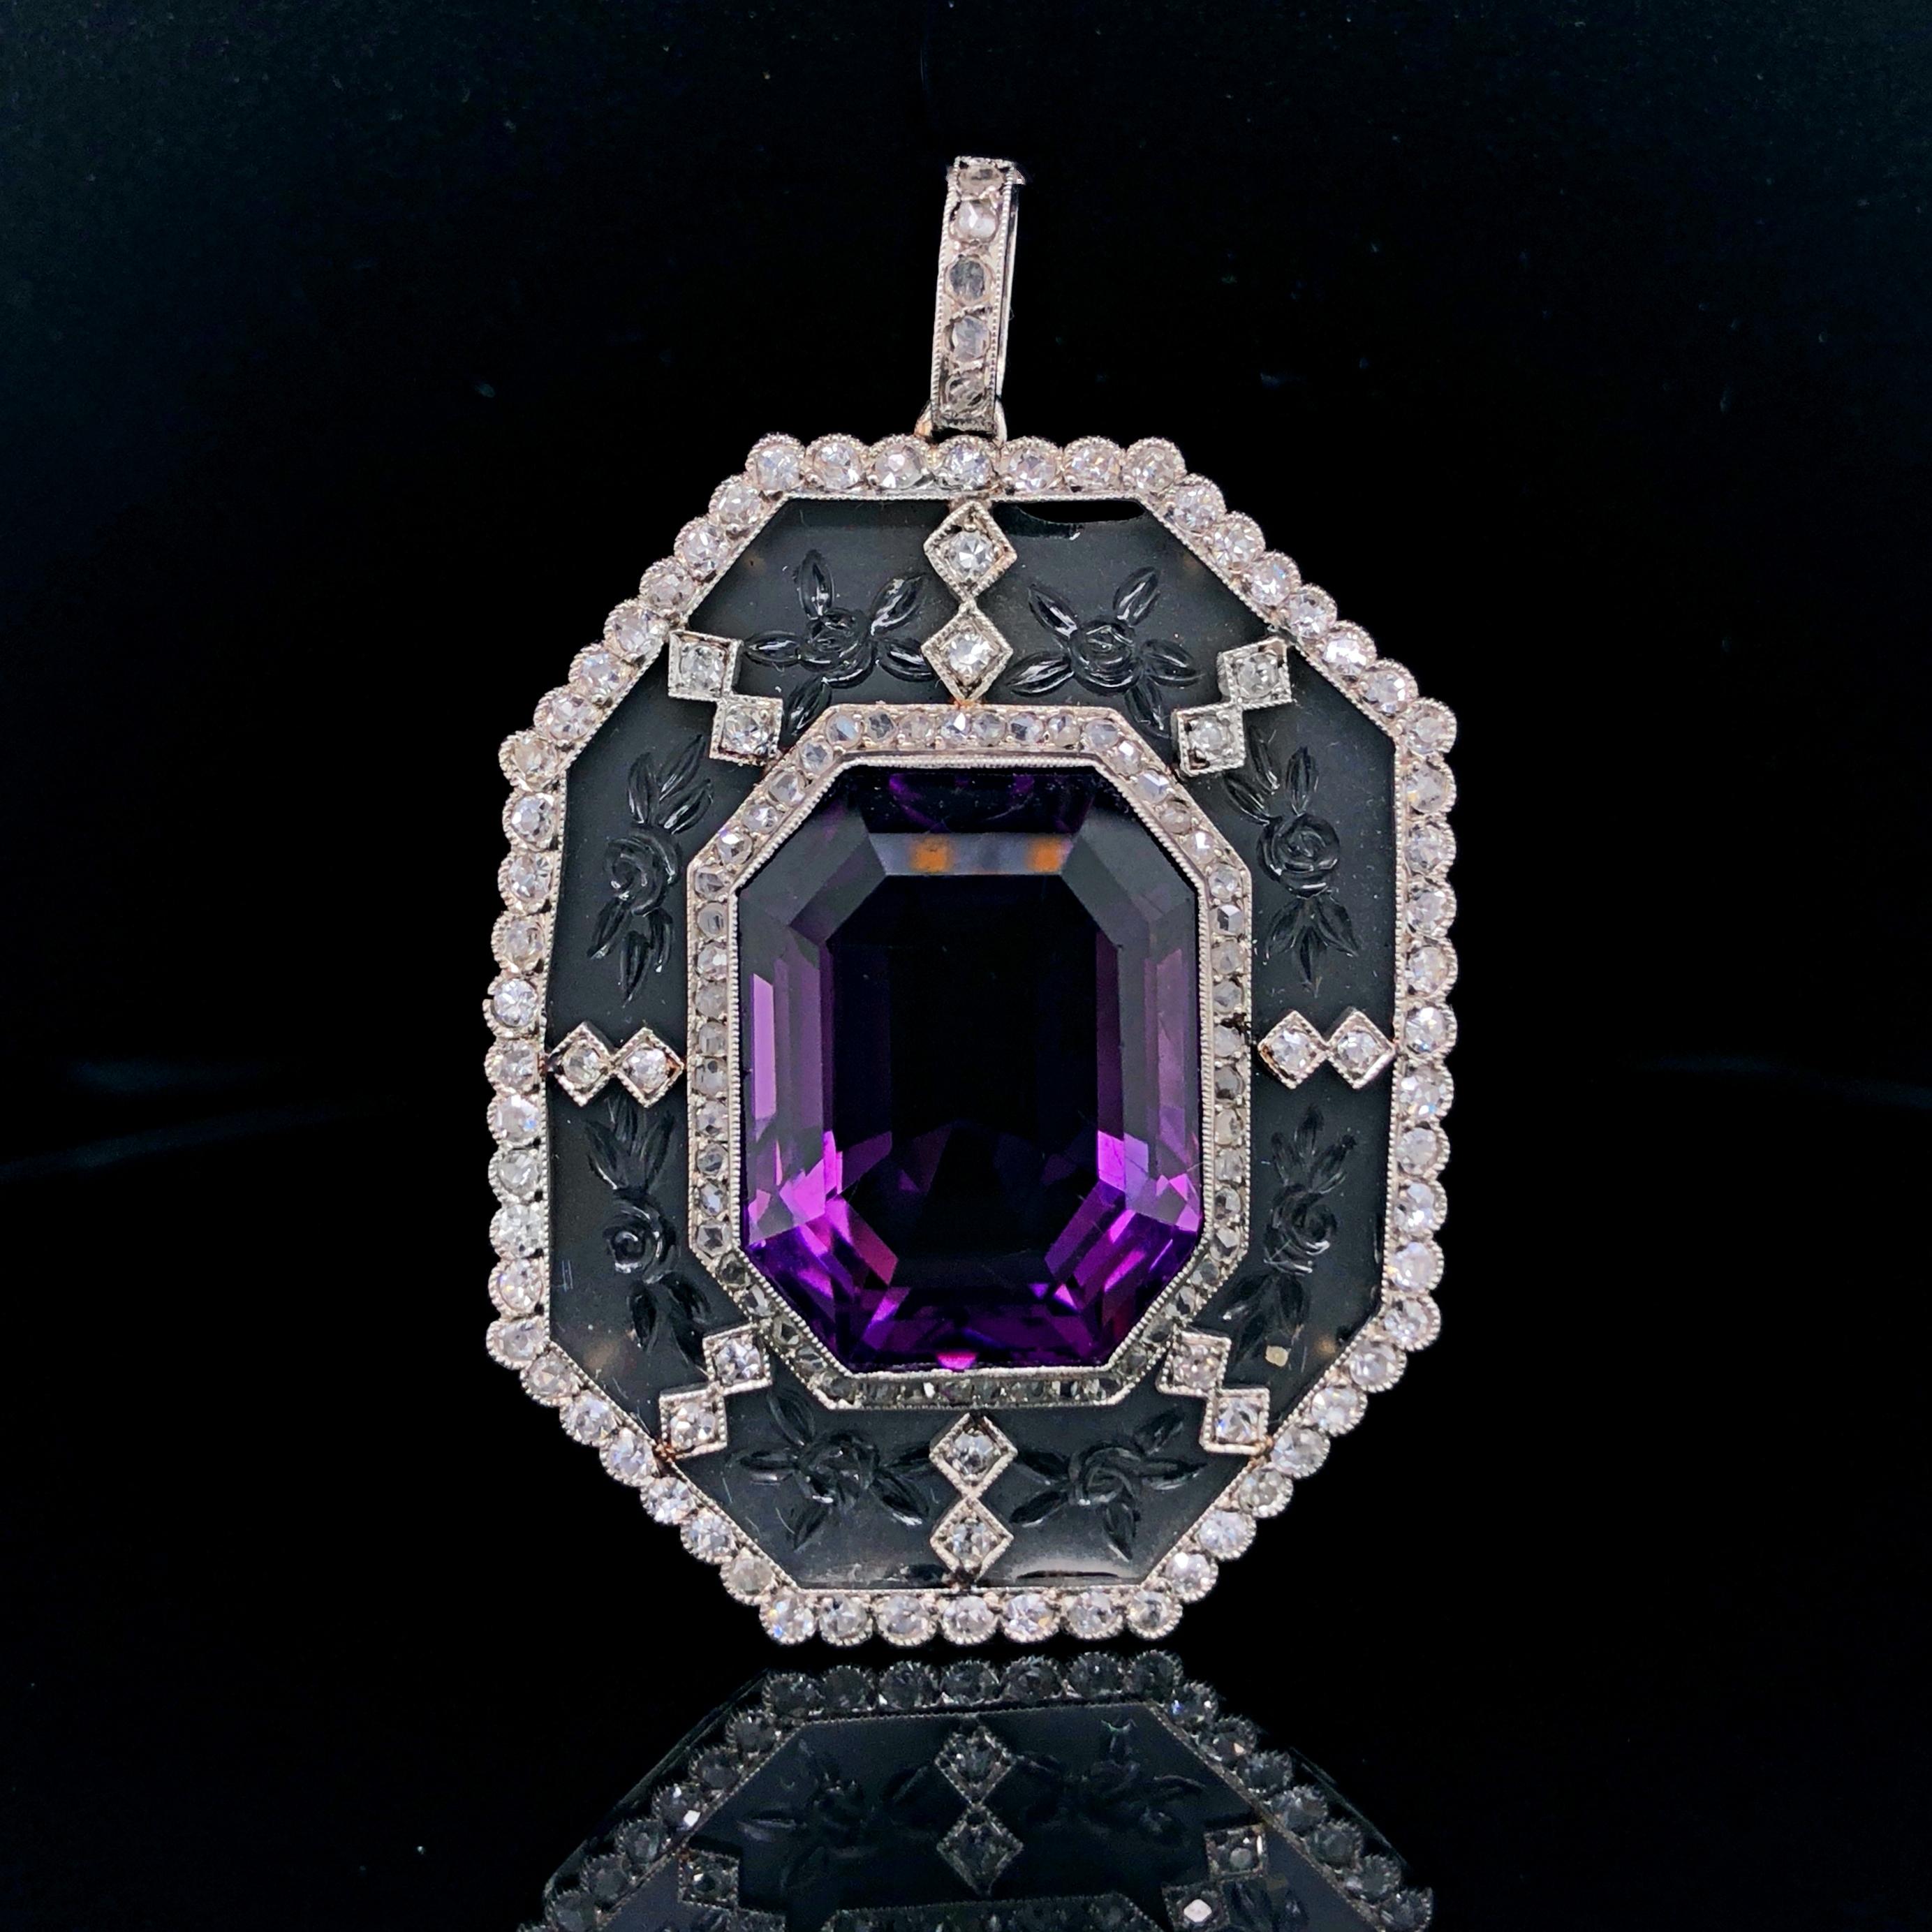 An amethyst, diamond and rock crystal pendant in platinum, France, ca. 1910s. 
The large emerald cut amethyst weighs approximately 18 carats and has a deep purple Siberian colour. It is very clean and free of inclusions, with natural growth lines